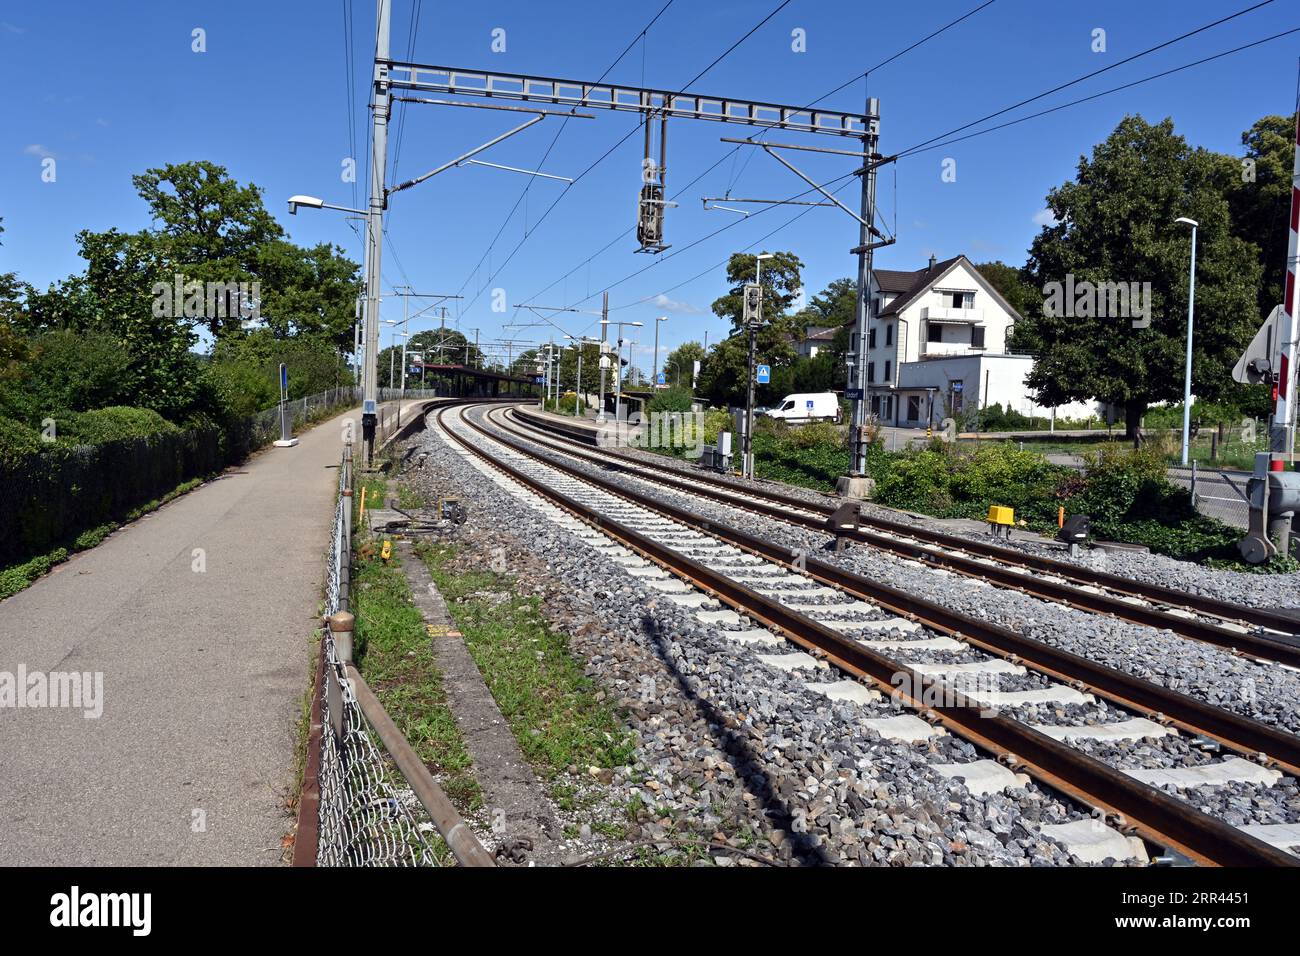 The rails or tracks leading to the railway station with buildings in village Urdorf in Switzerland. Stock Photo